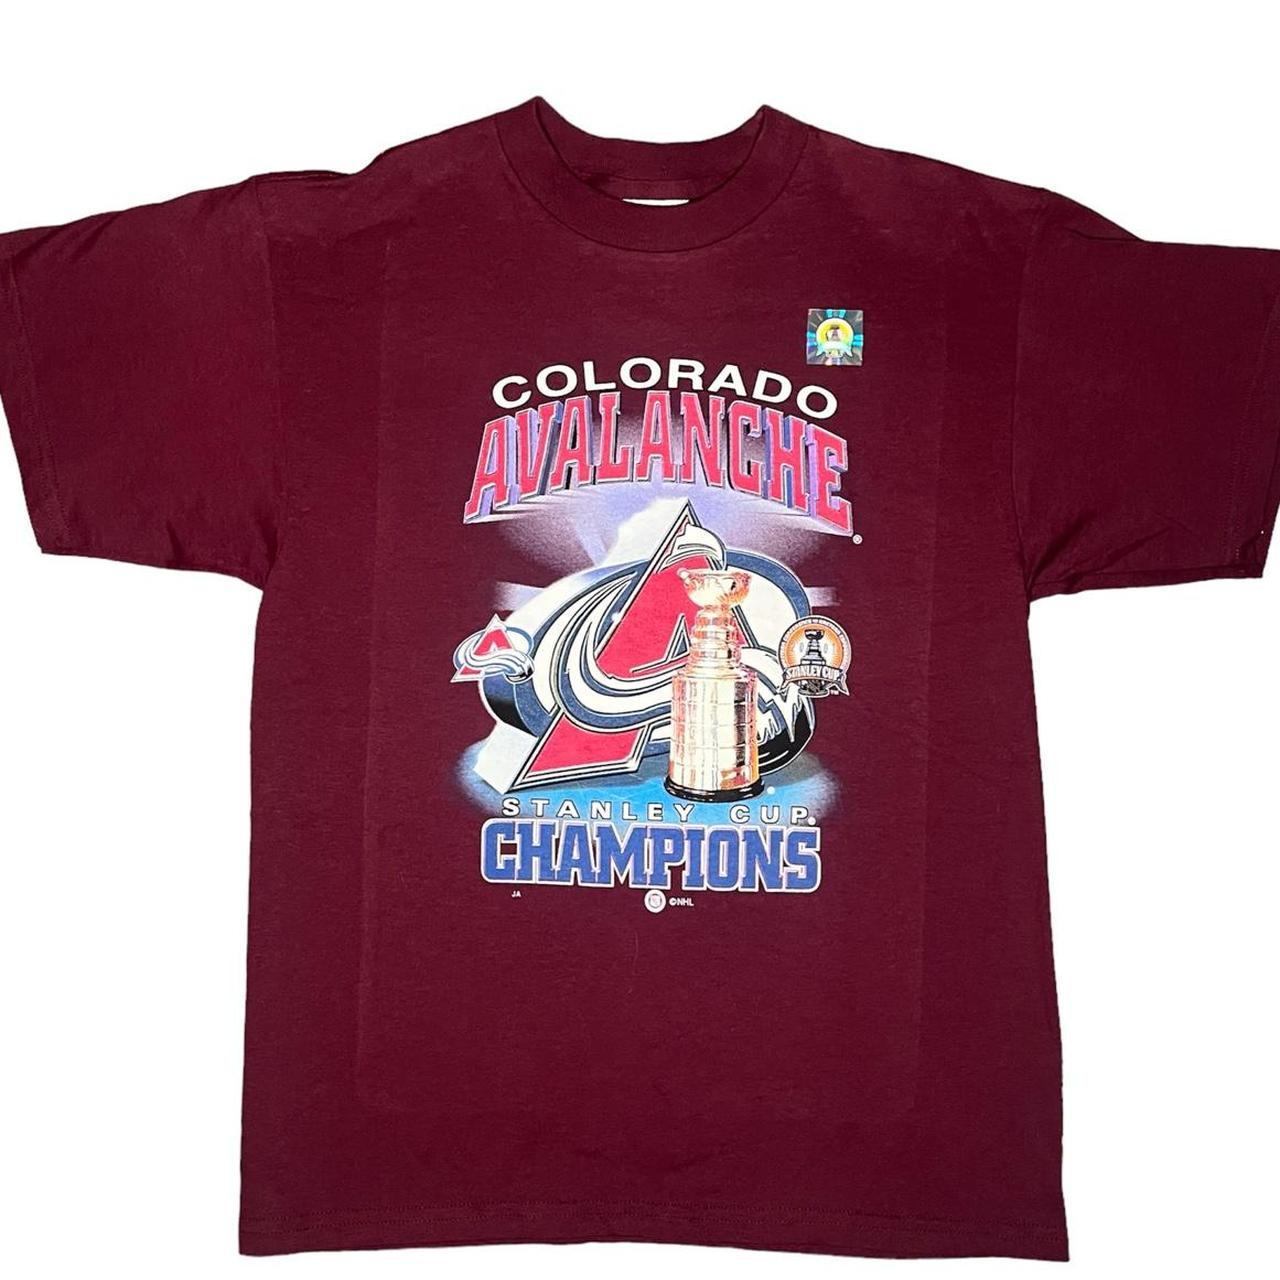 Colorado Avalanche Stanley cup champions 2001 vintage t-shirt